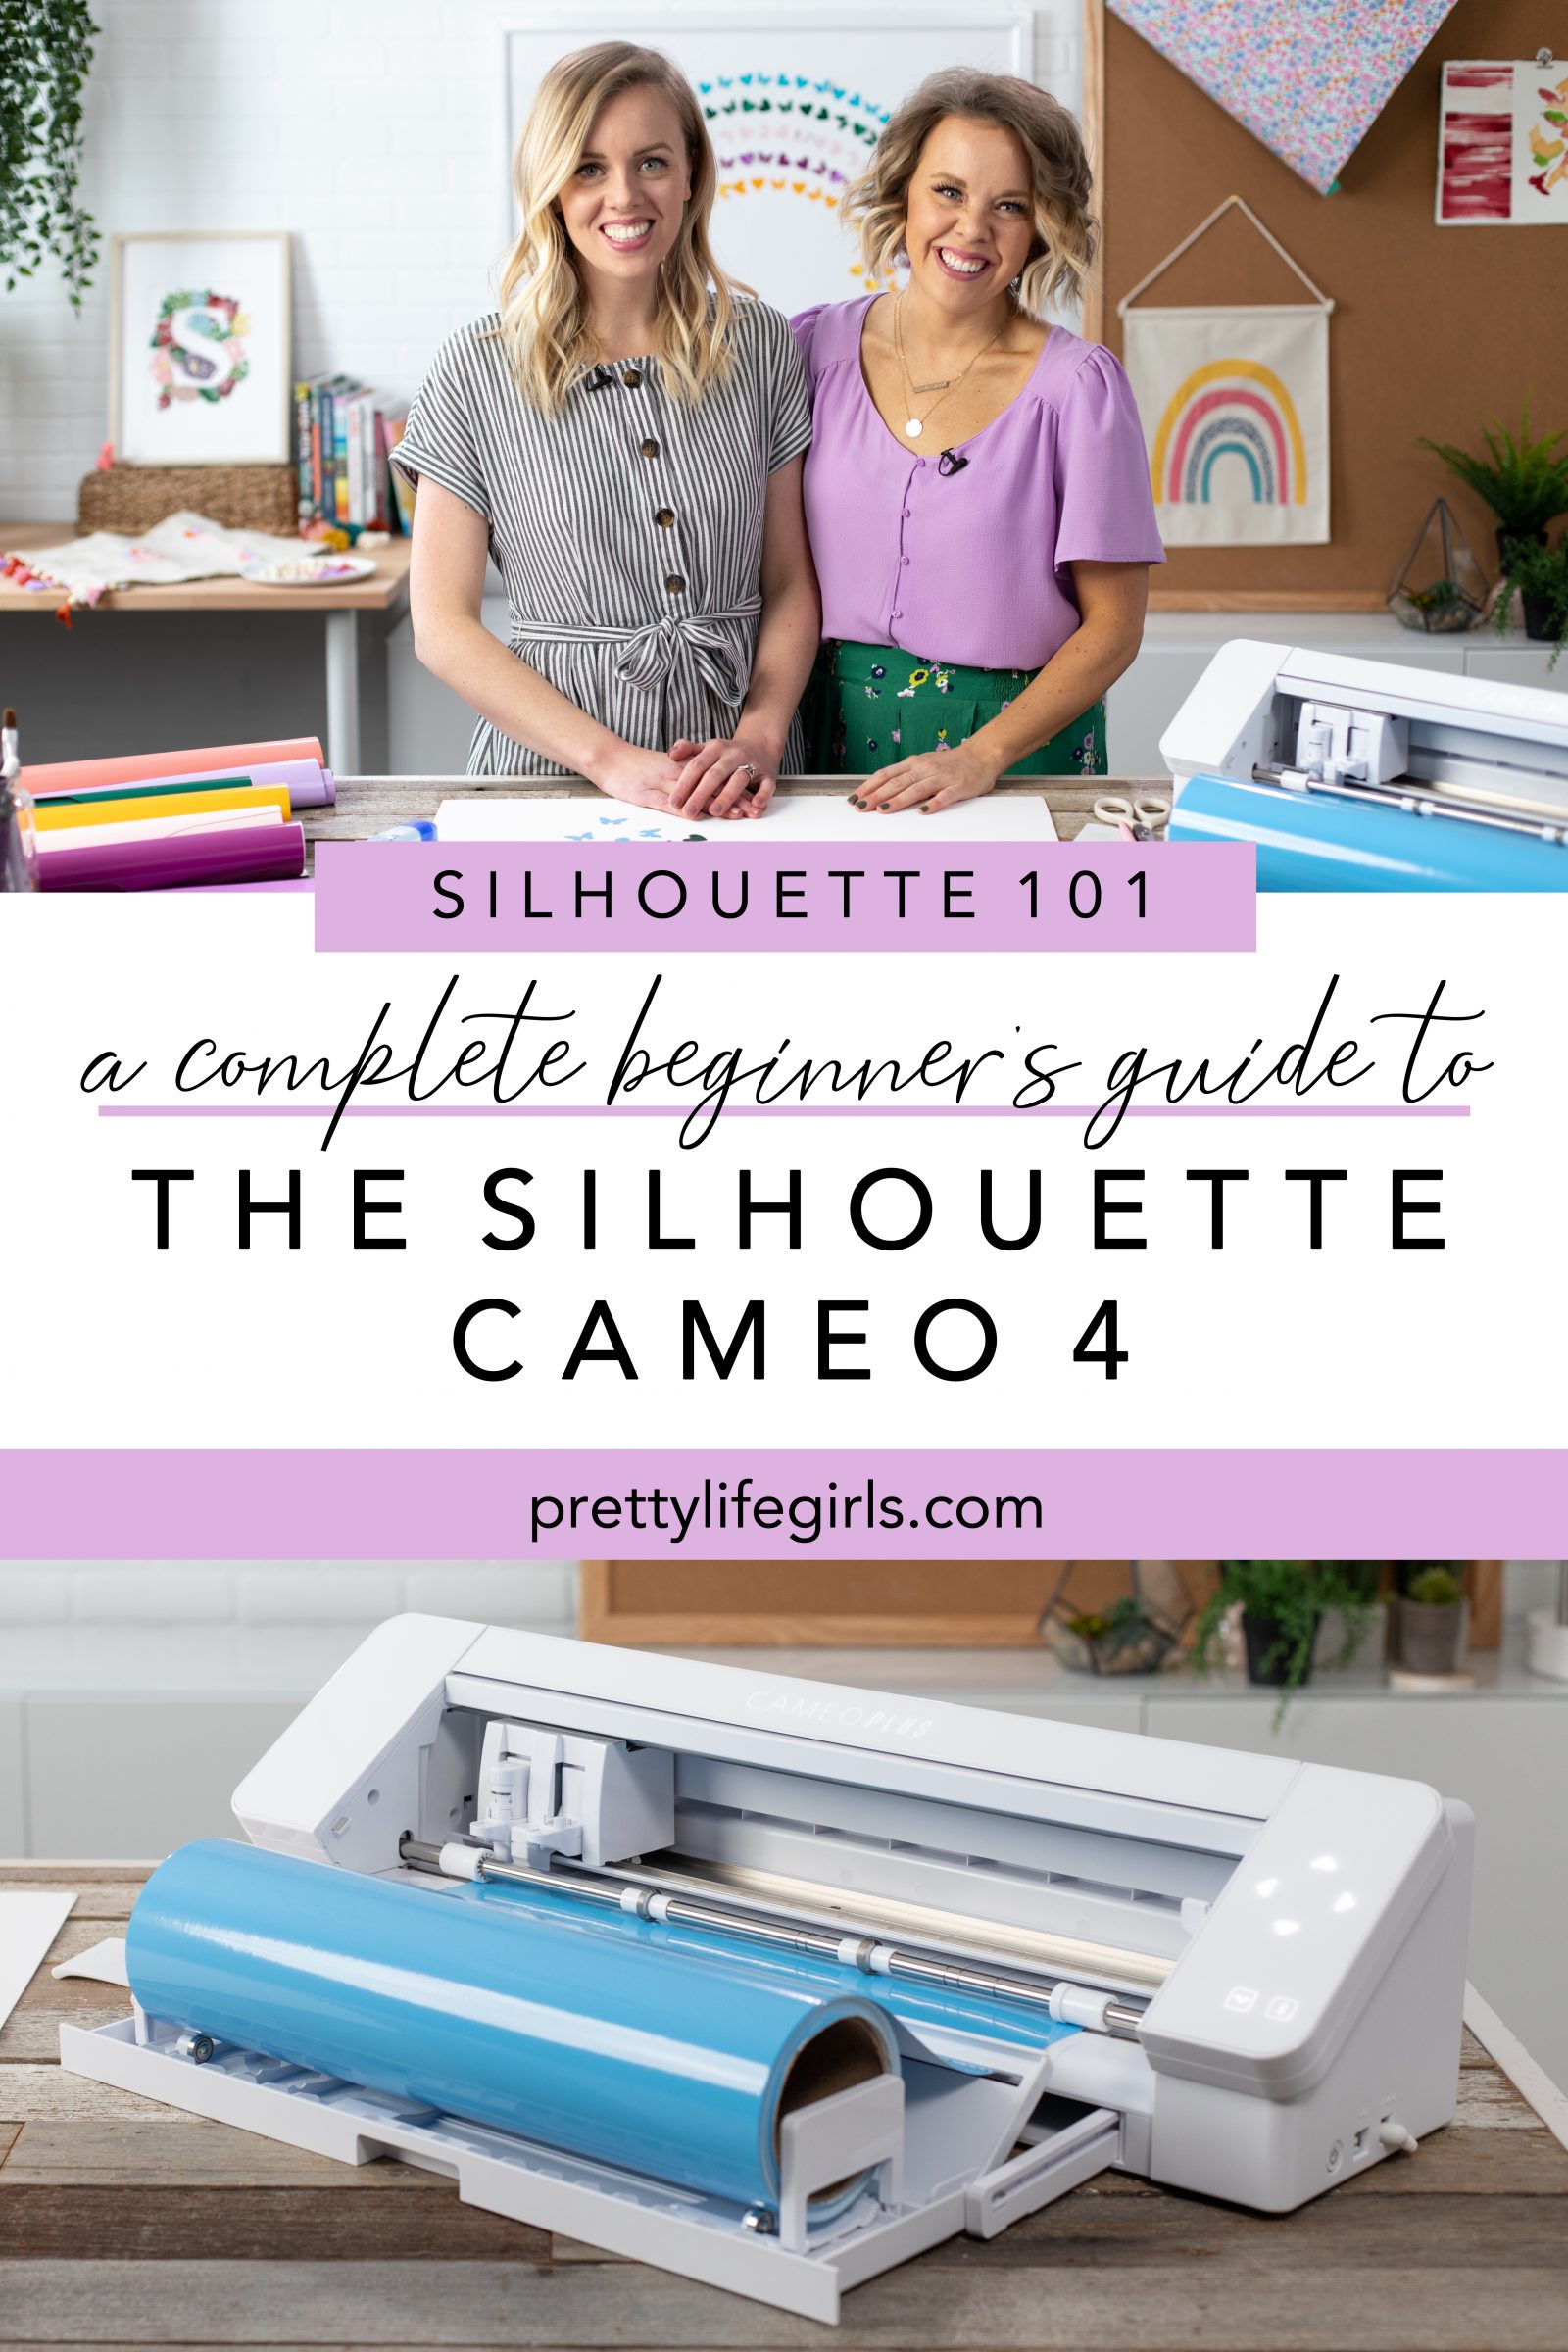 How to Use the Silhouette Cameo 4: A Guide to Getting Started